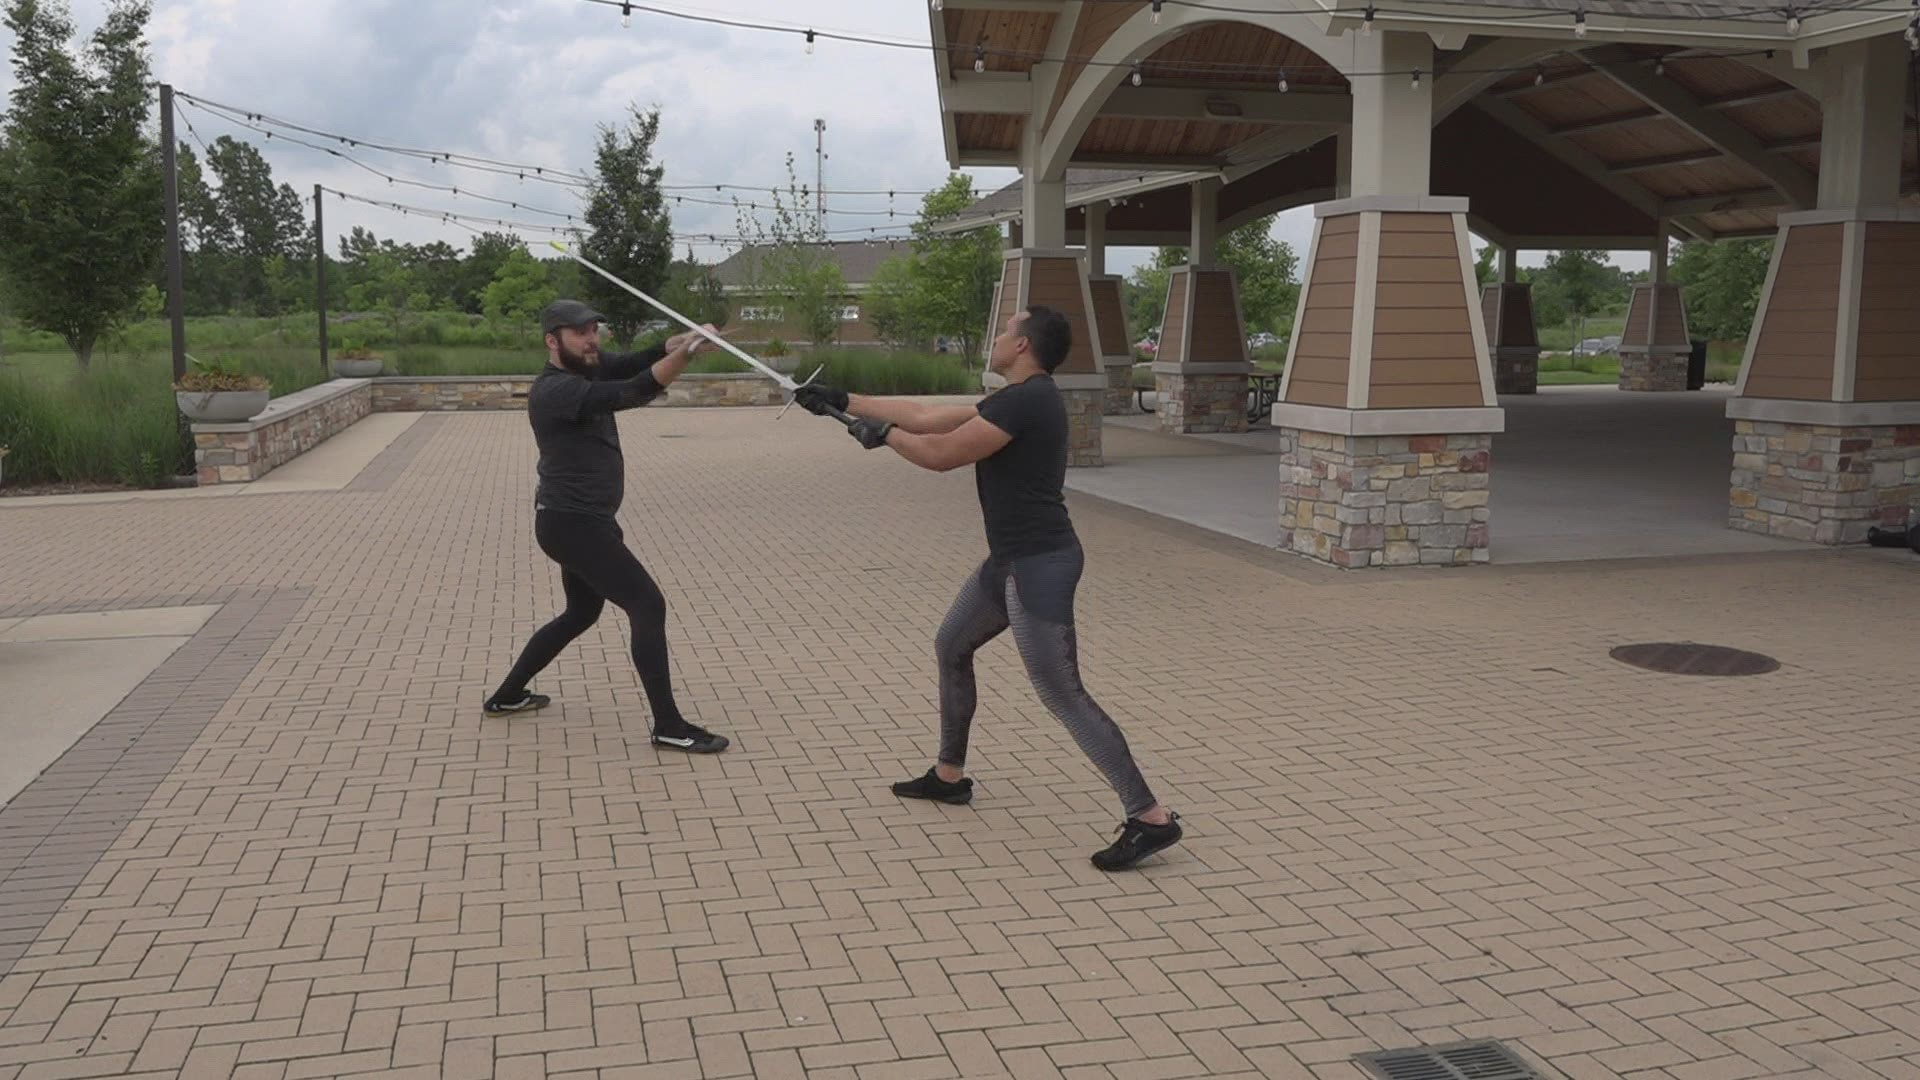 Centerline Sword School teaches a variety of disciplines from longsword to wrestling.